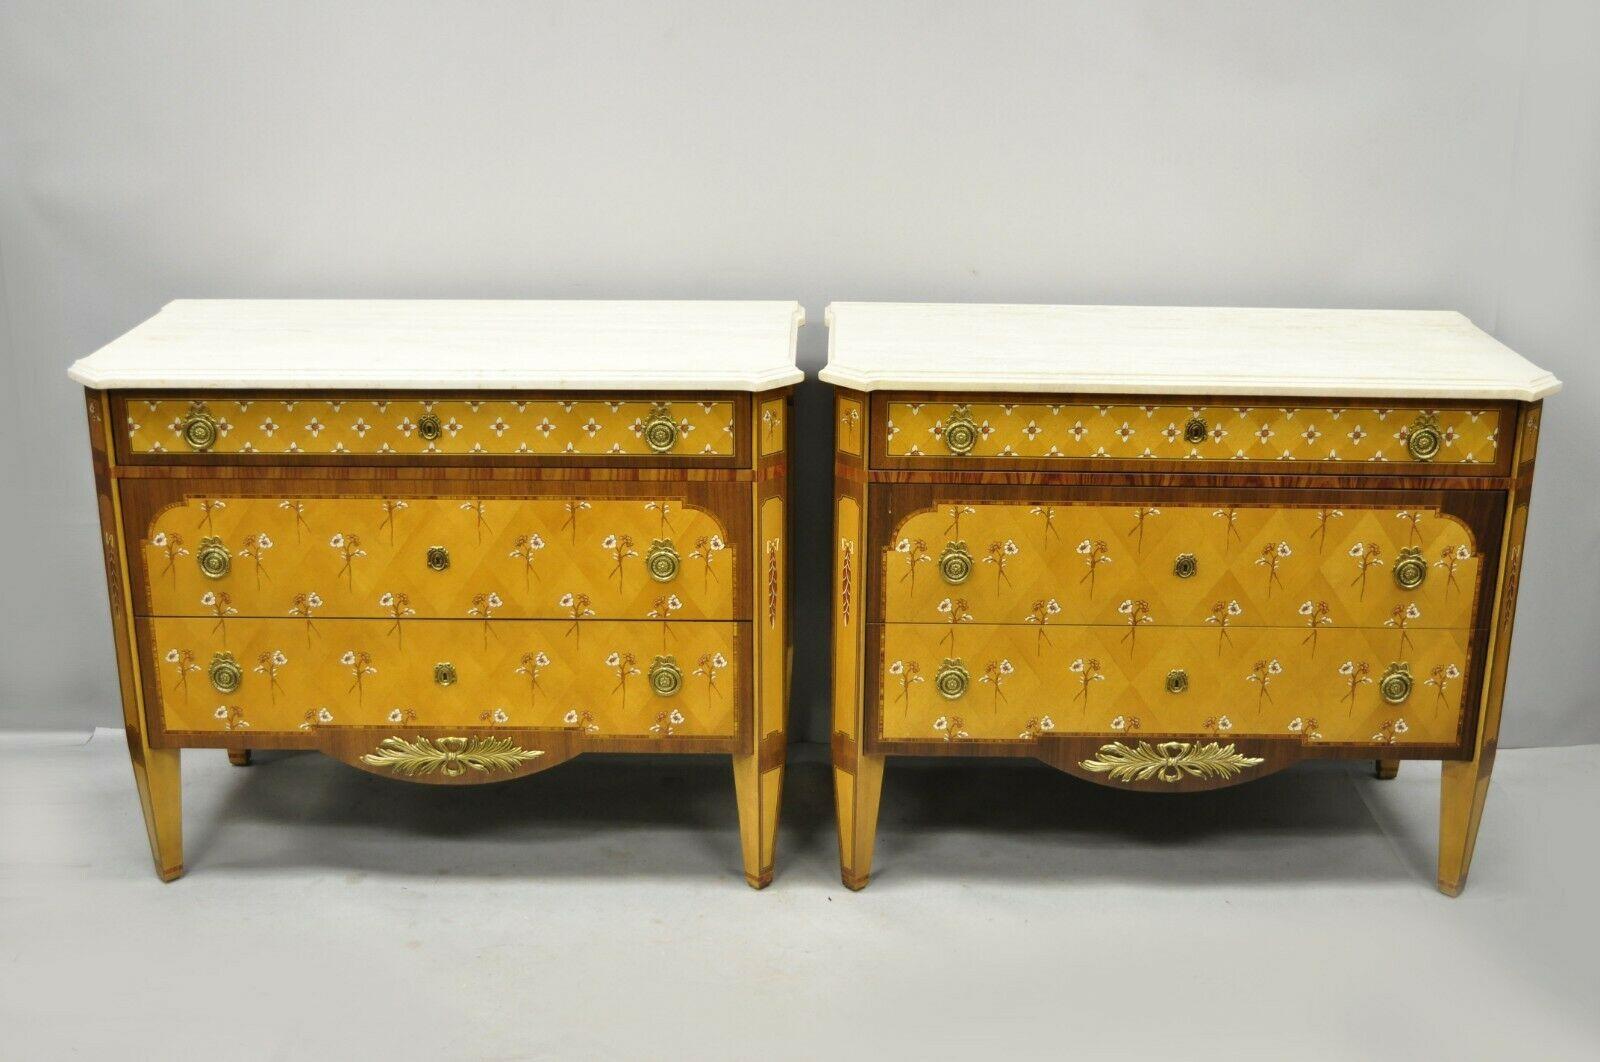 Pair of floral painted travertine marble-top commode chest dresser by E.J. Victor. Items feature shaped and bevelled travertine stone tops, floral painted details to fronts and sides, ornate brass hardware, beautiful wood grain, original label to